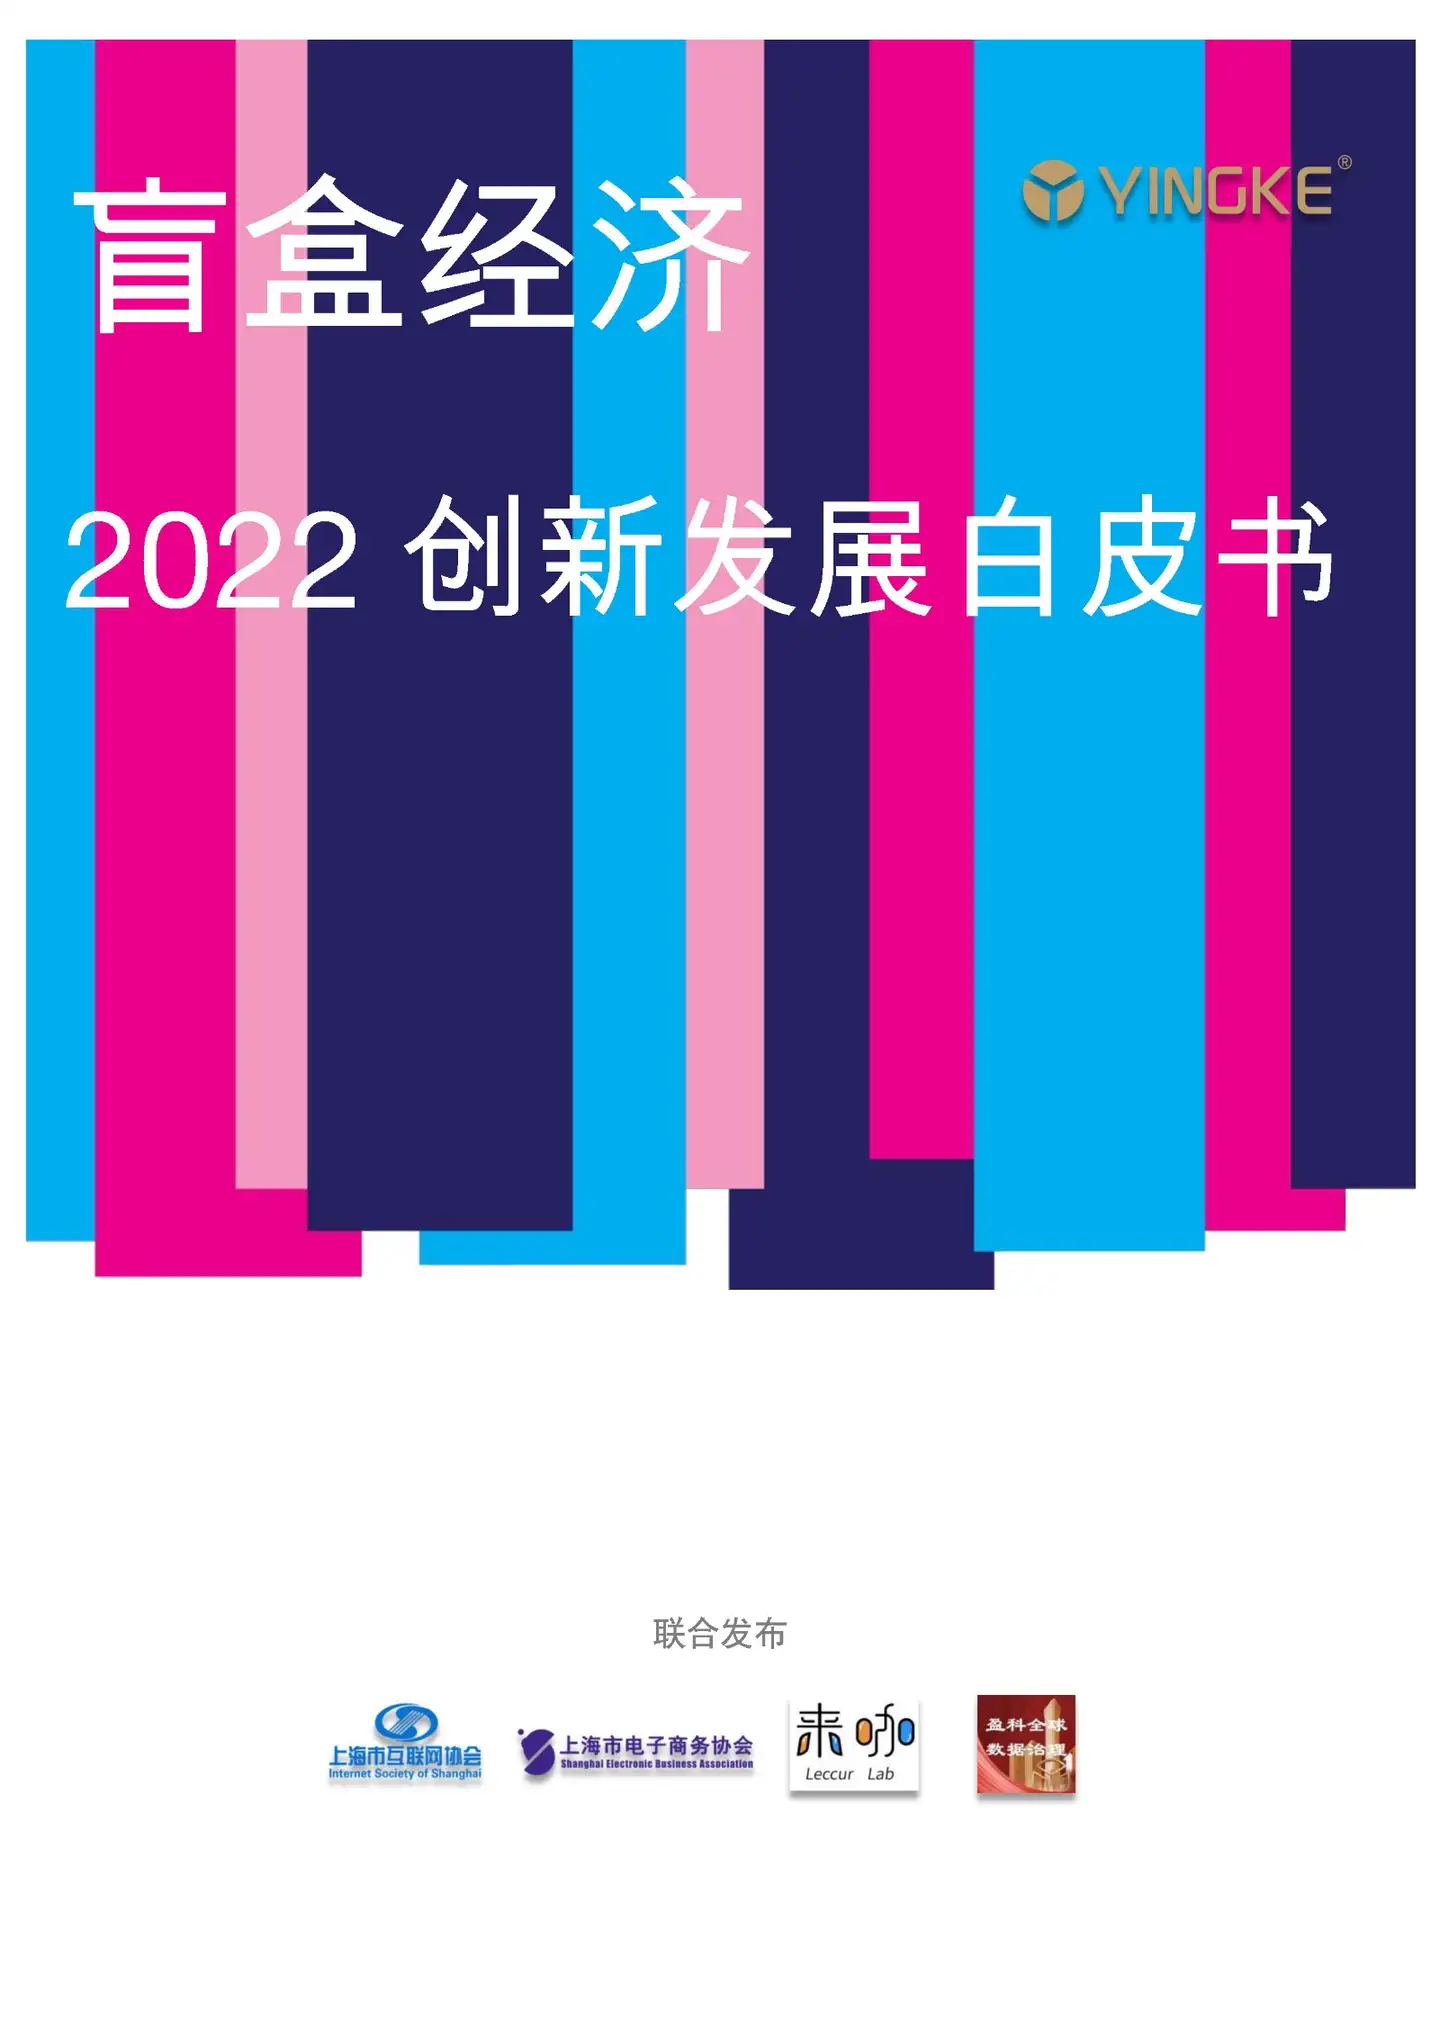 New Year 2022 Color Palette